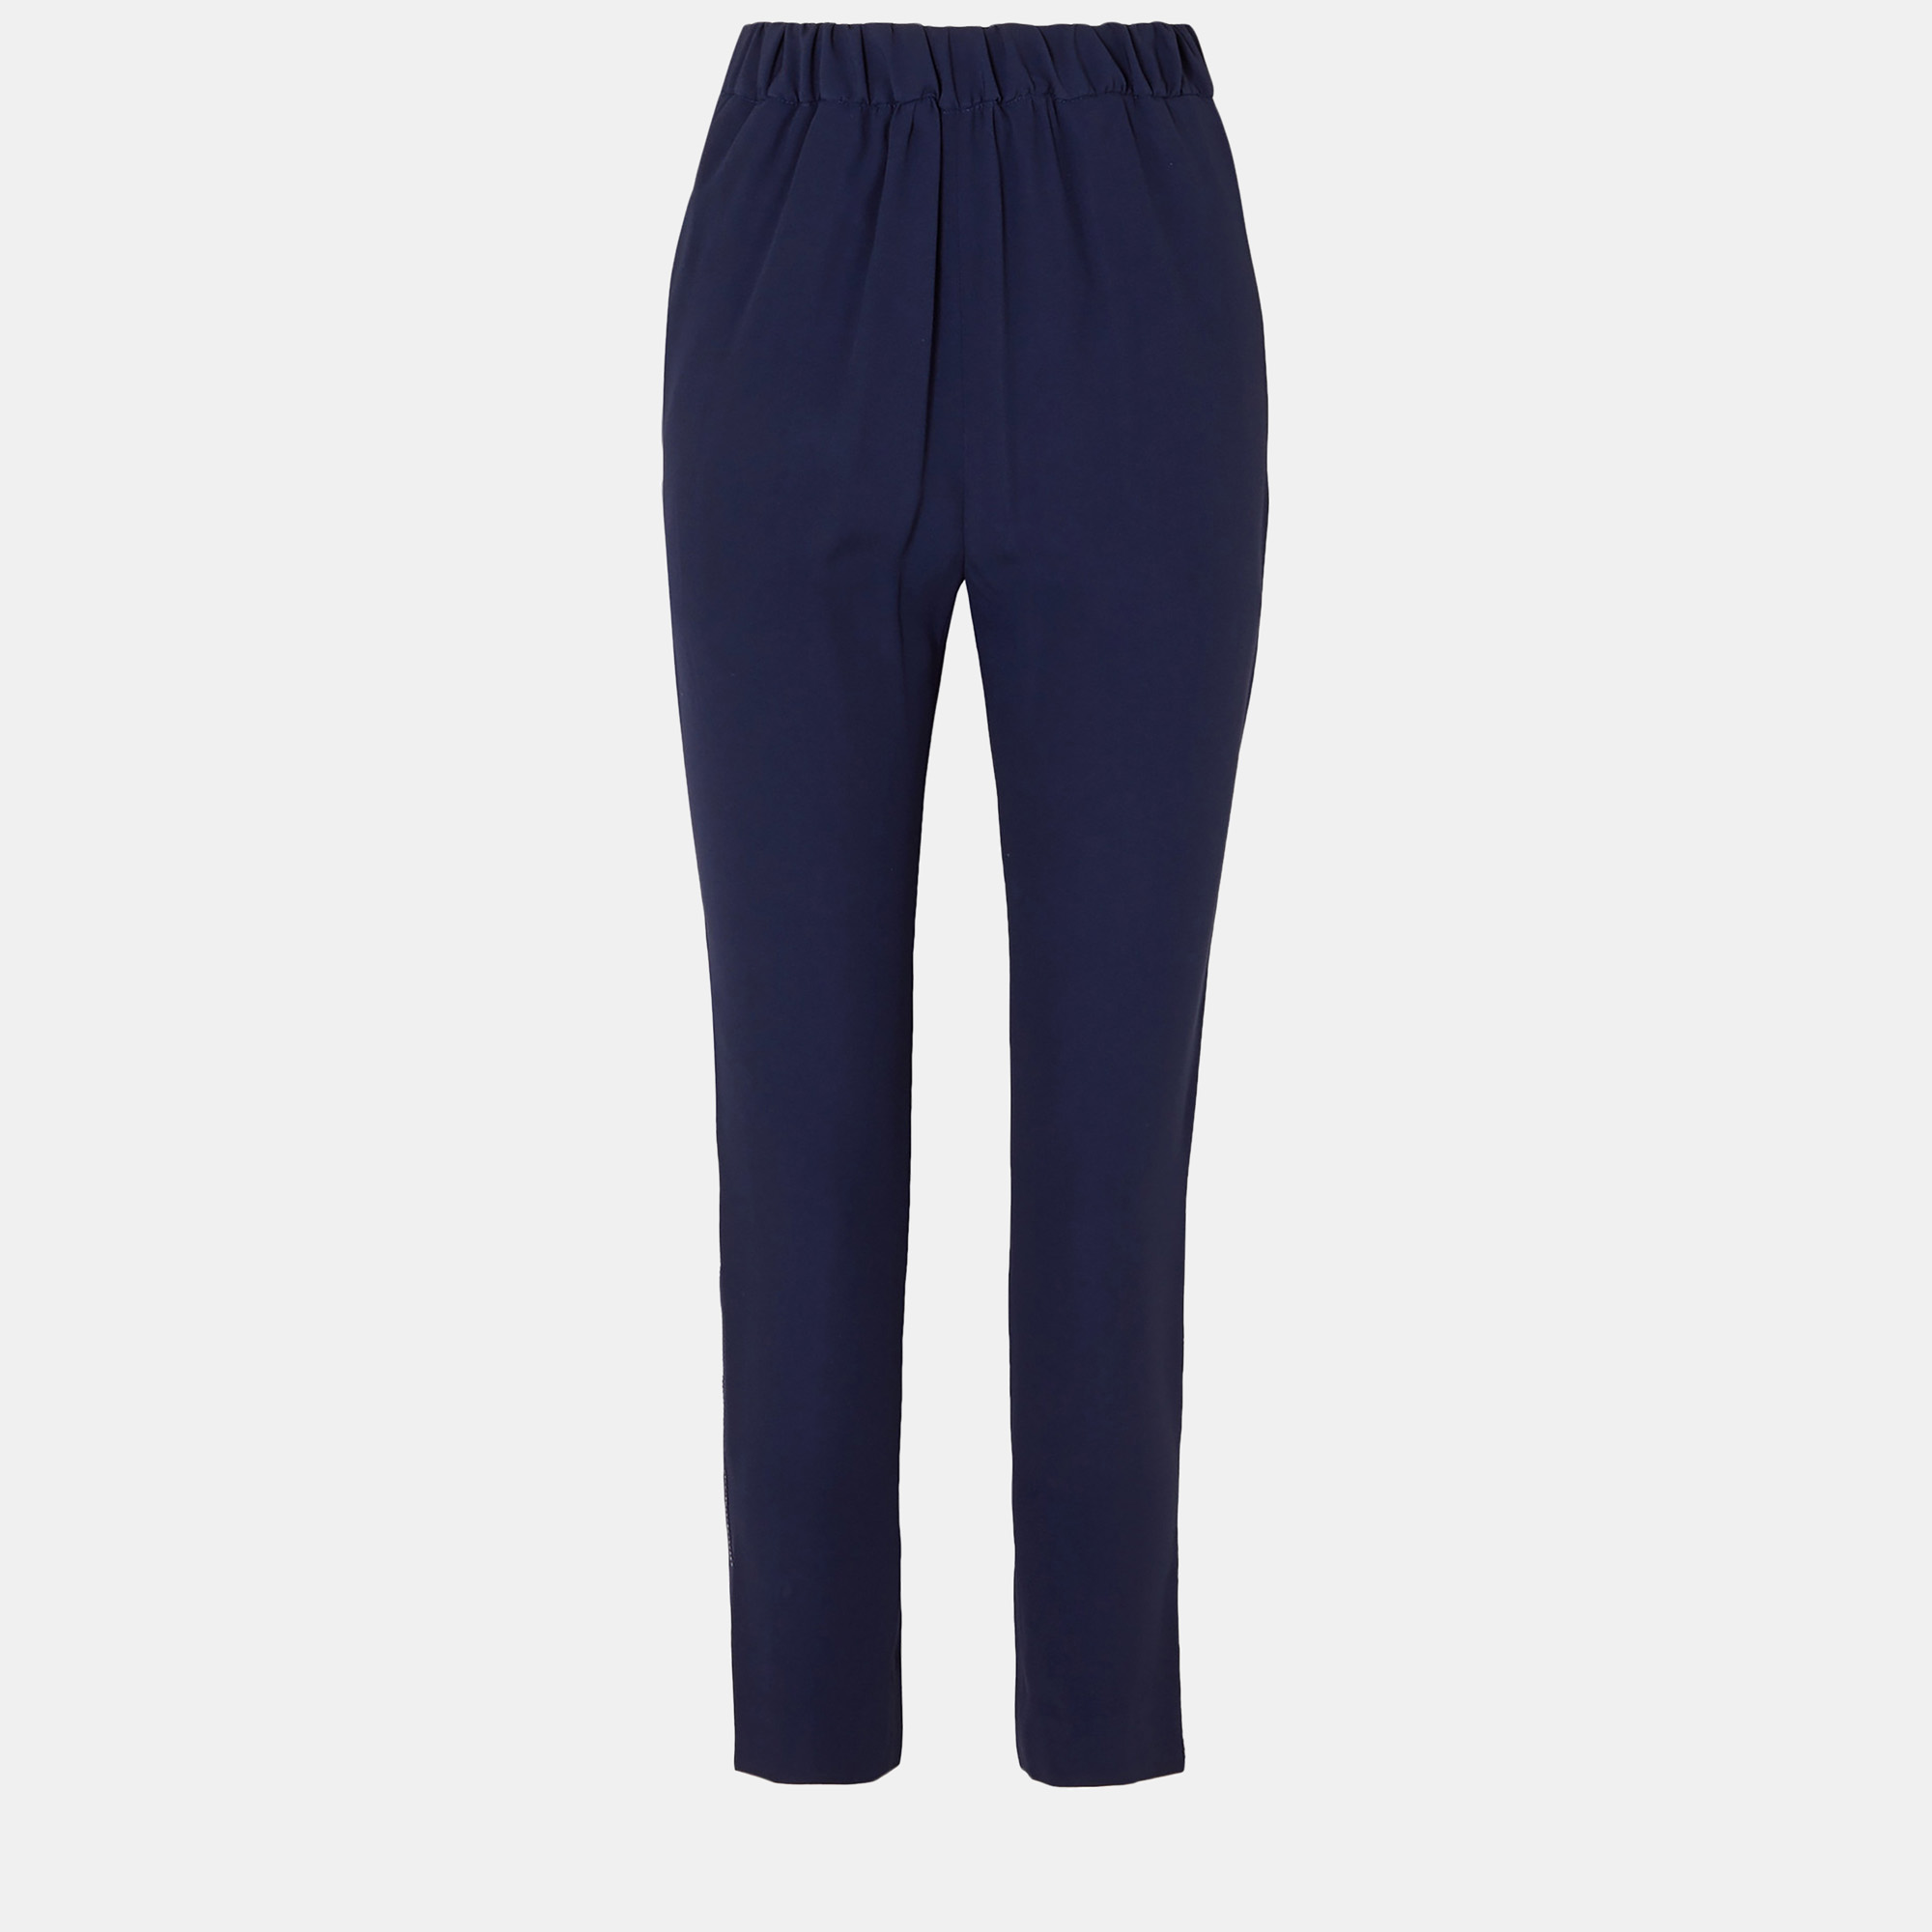 Marni navy blue crepe trousers size 36